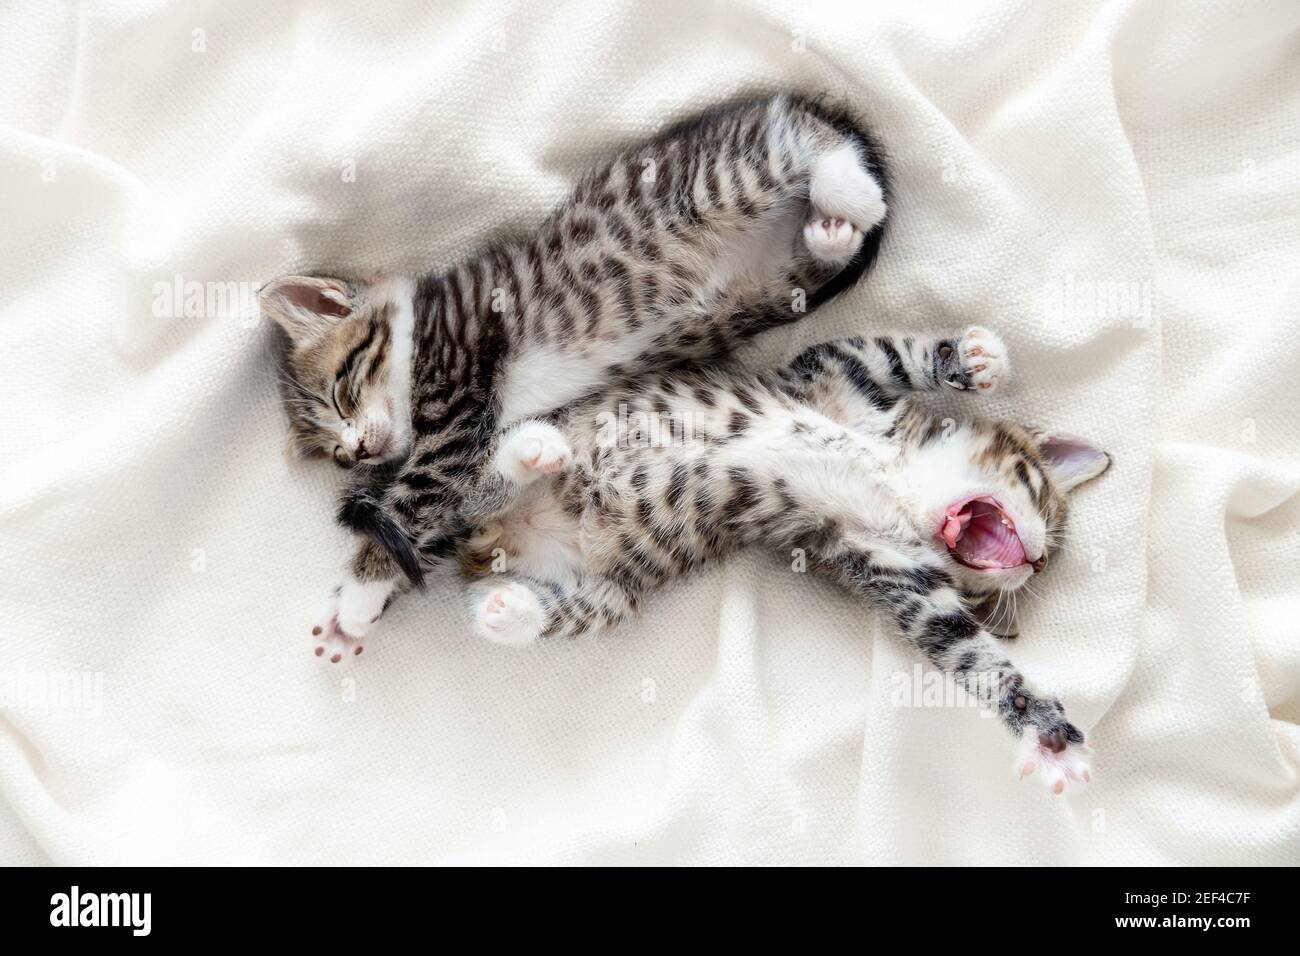 Two striped kitten waking up, yawning and stretching. kittens lying in funny pose with open mouth on white bed. happy adorable cat pets. Stock Photo